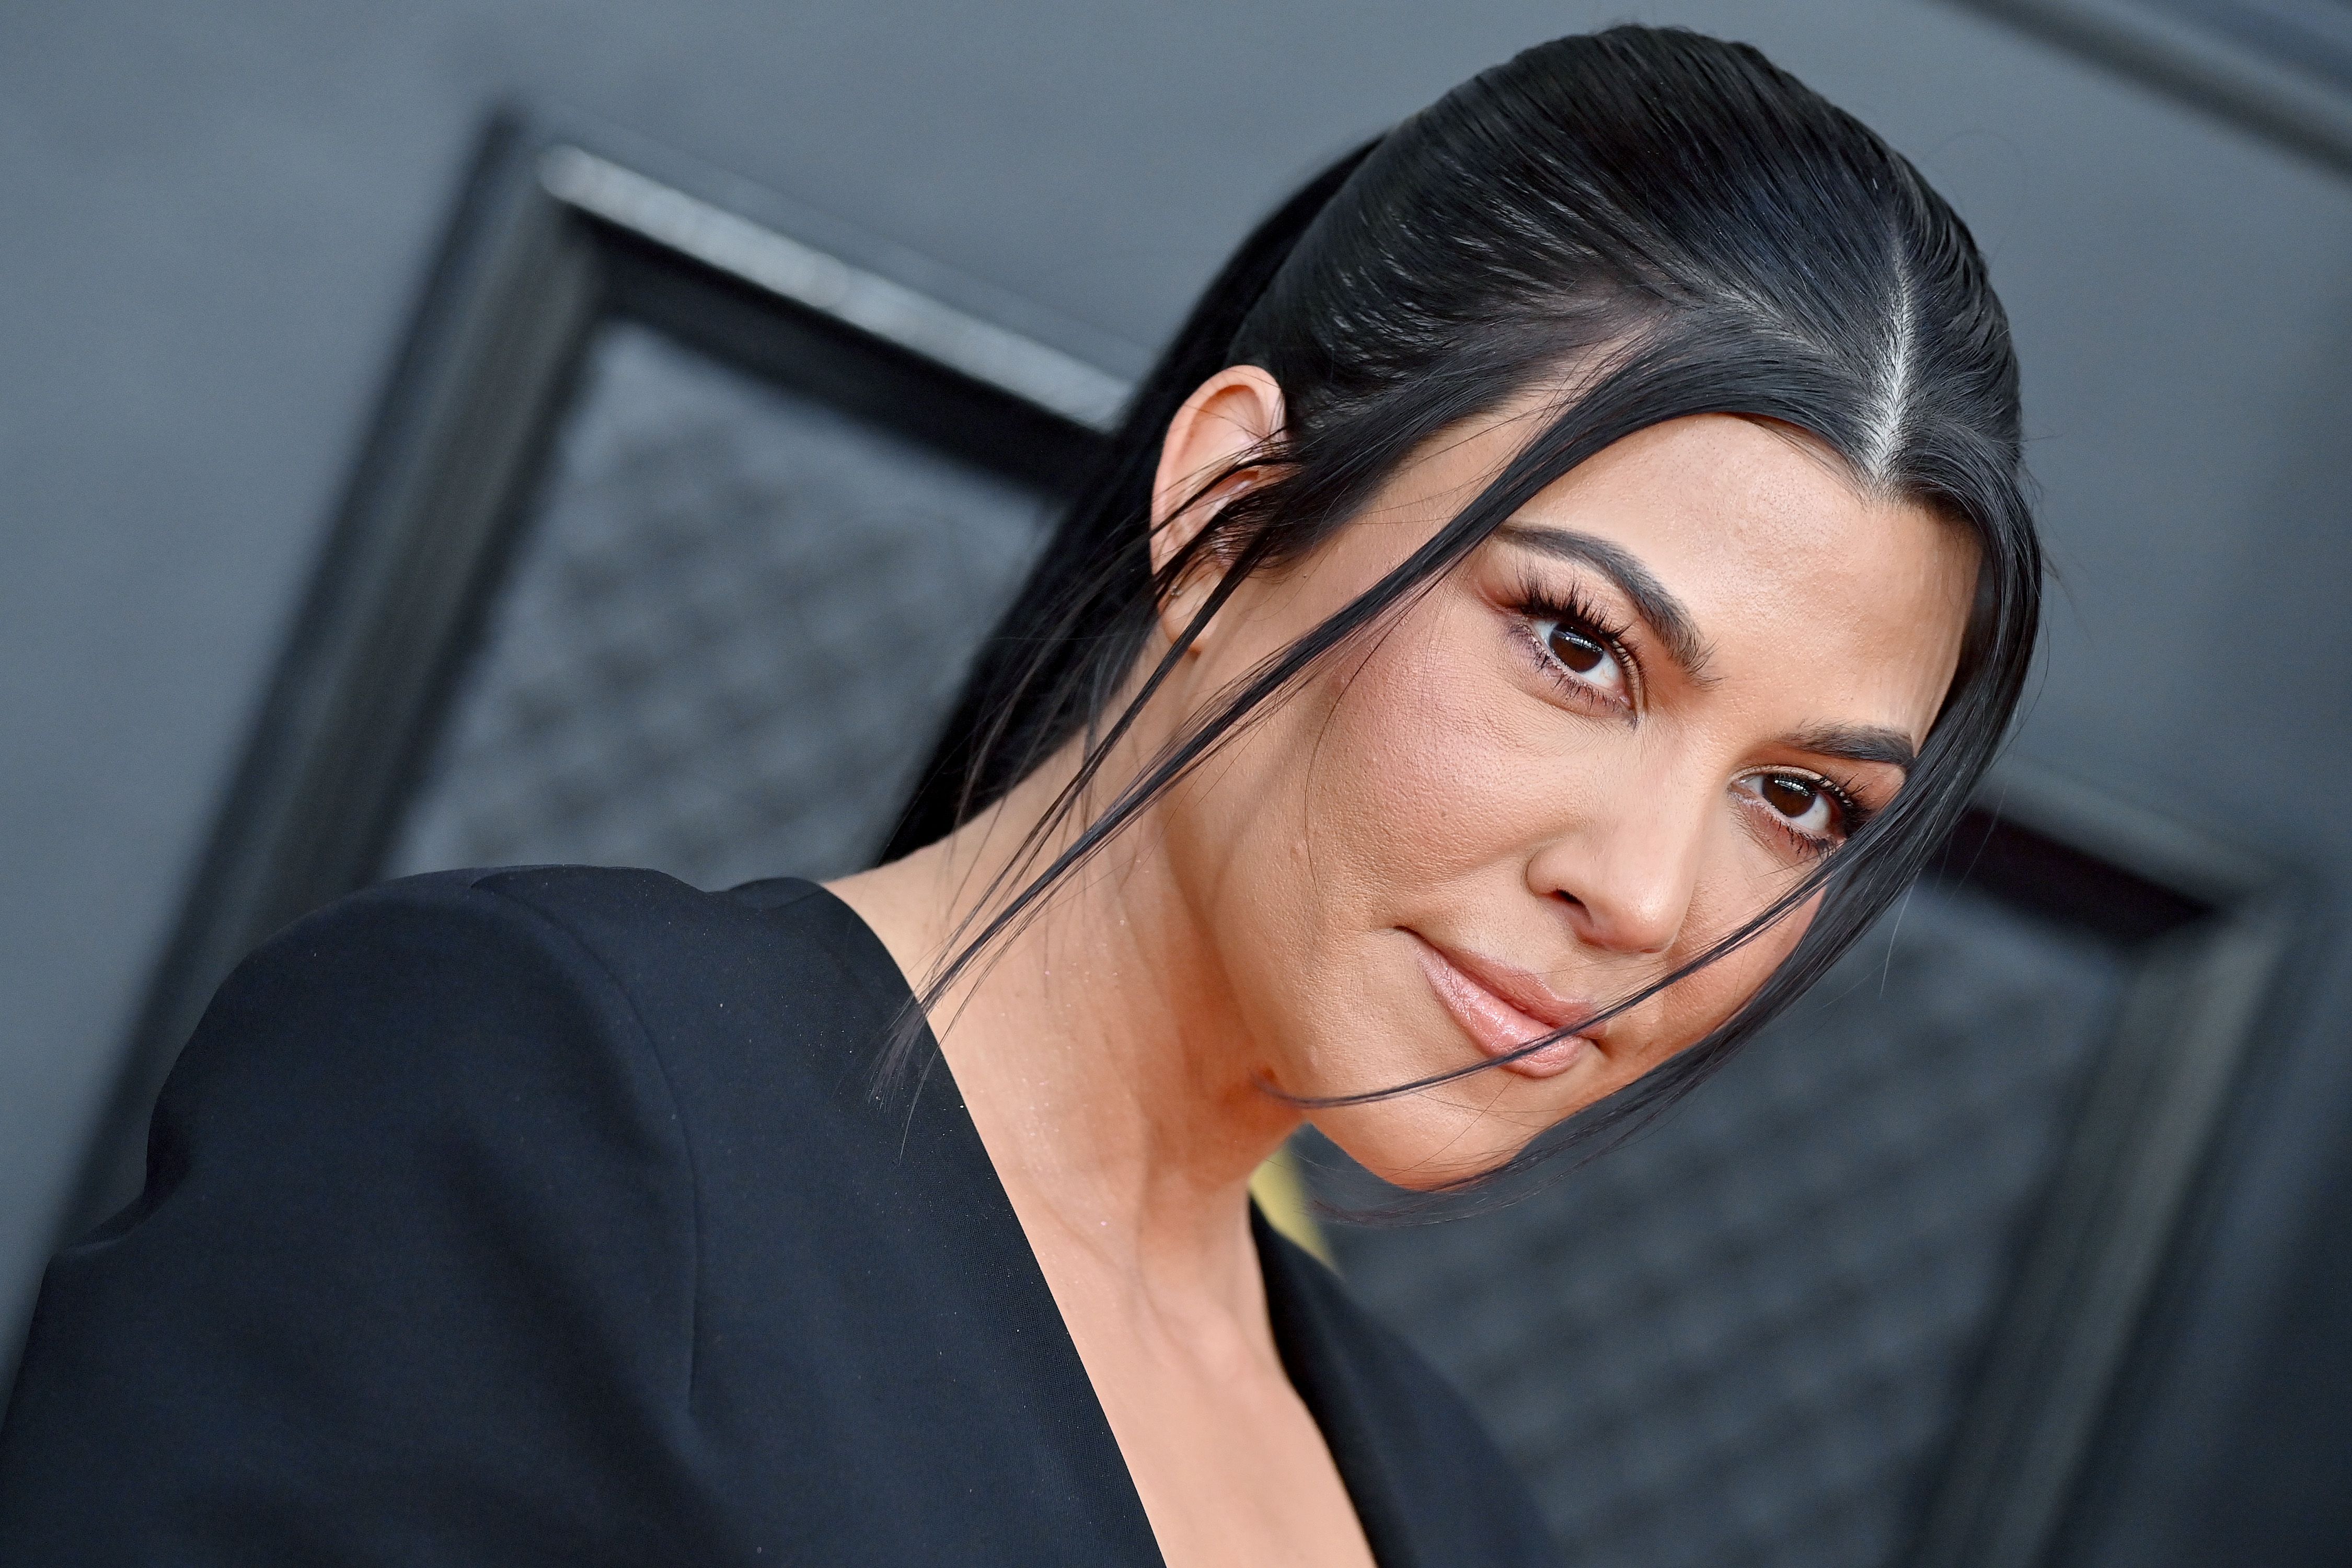 Kylie Jenner's Combat Boots Give Her Neon Green Dress an Edgy